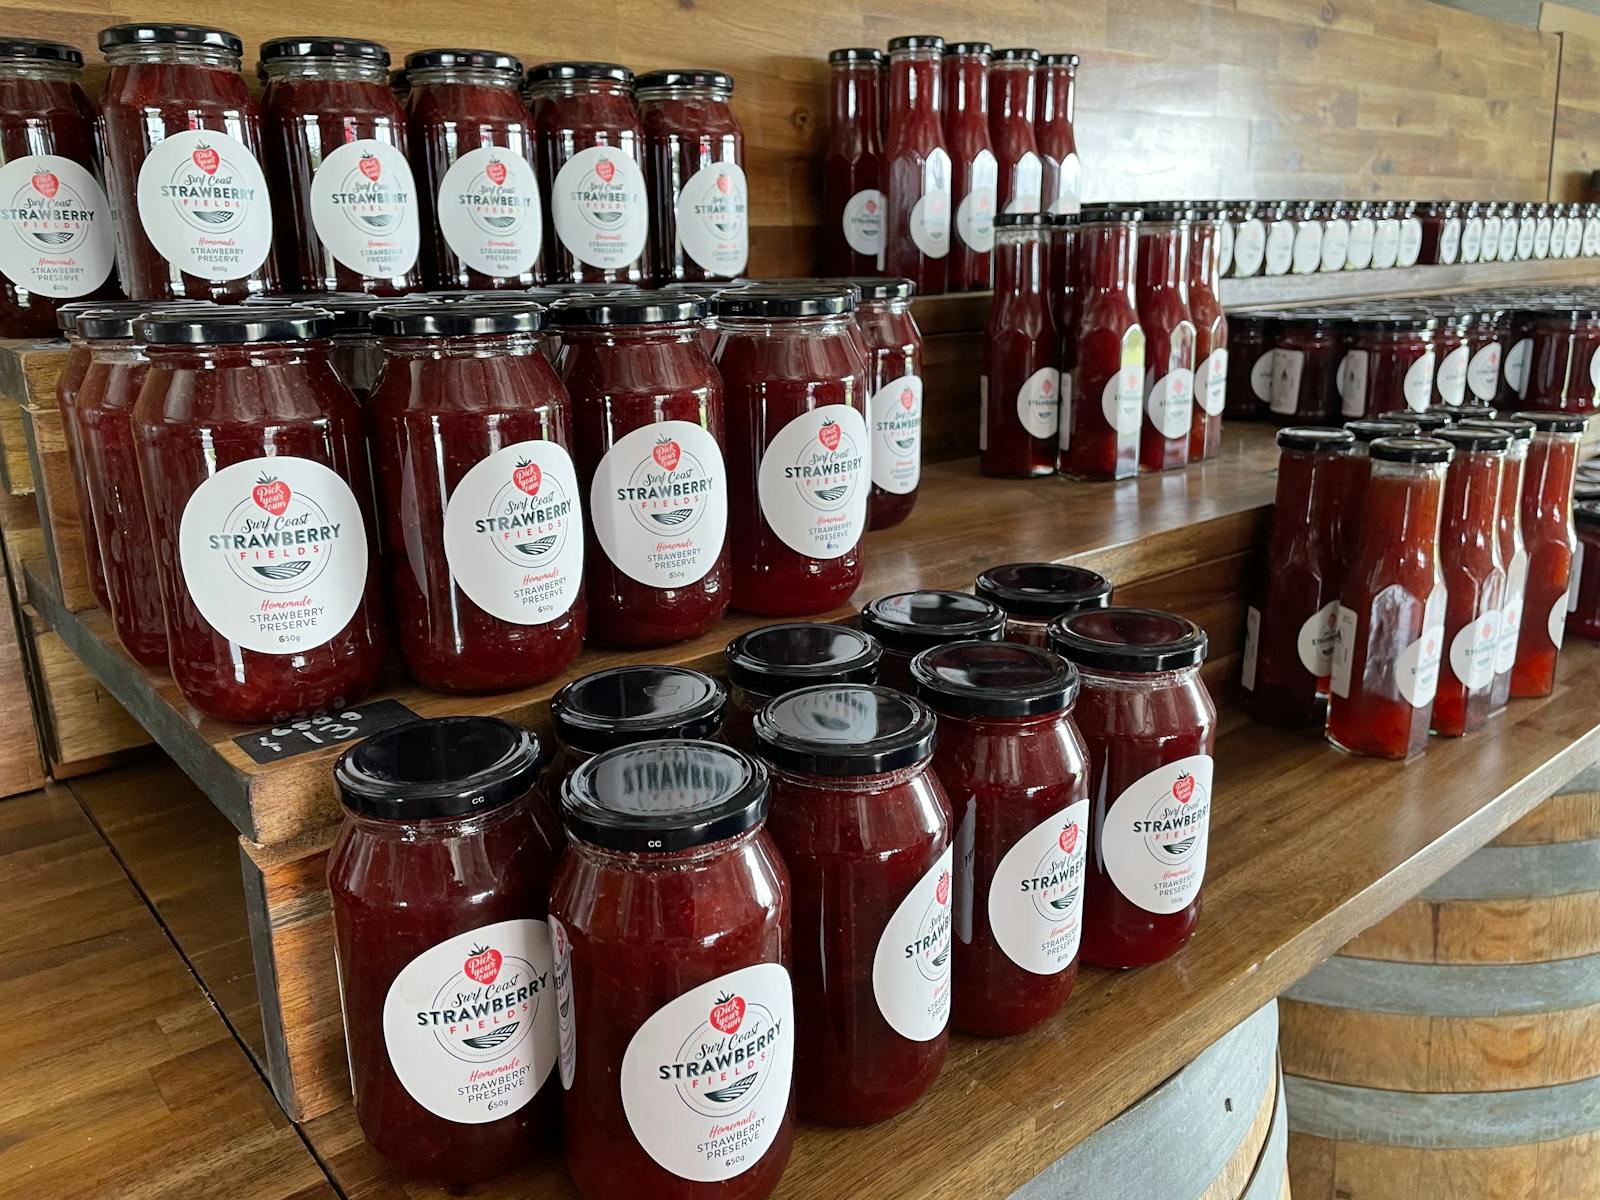 Farm strawberry preserves and sauces